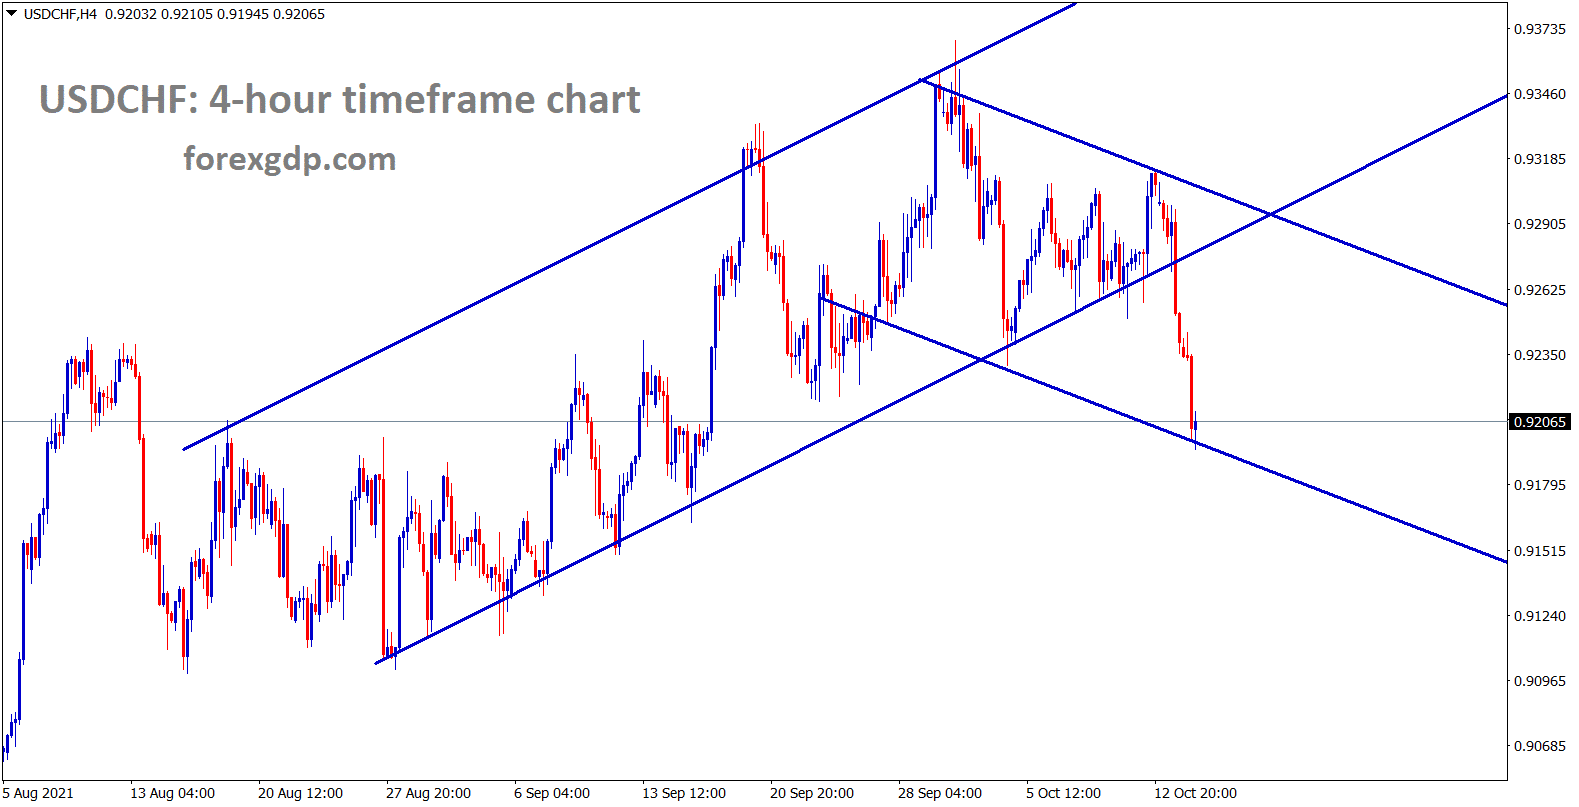 USDCHF has broken the uptrend line and now falling between the channel range